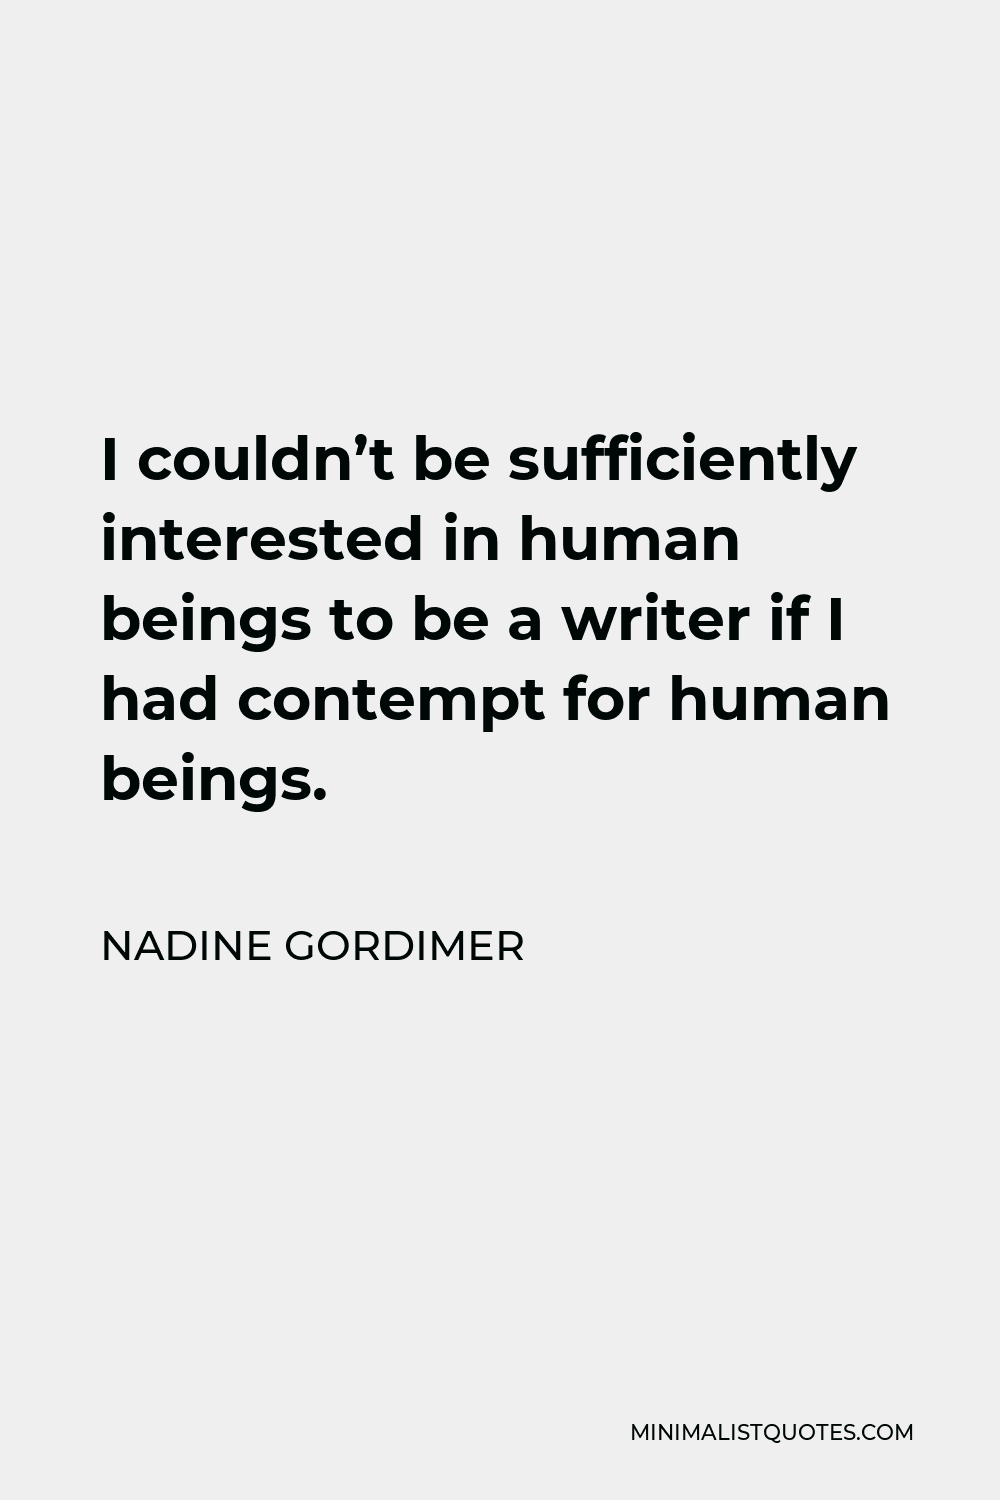 Nadine Gordimer Quote - I couldn’t be sufficiently interested in human beings to be a writer if I had contempt for human beings.